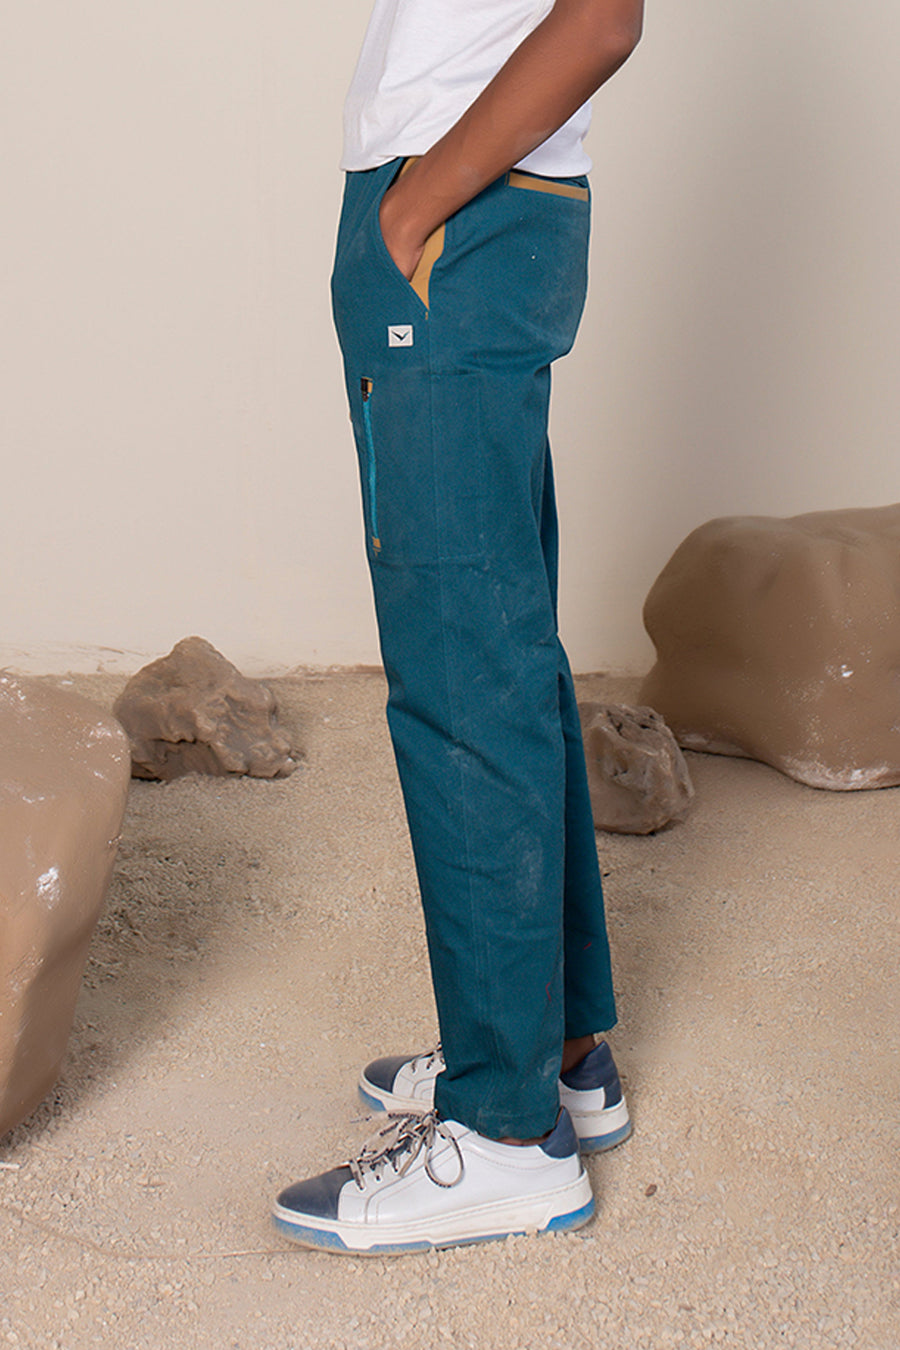 Sequoia Canvas Pant Teal